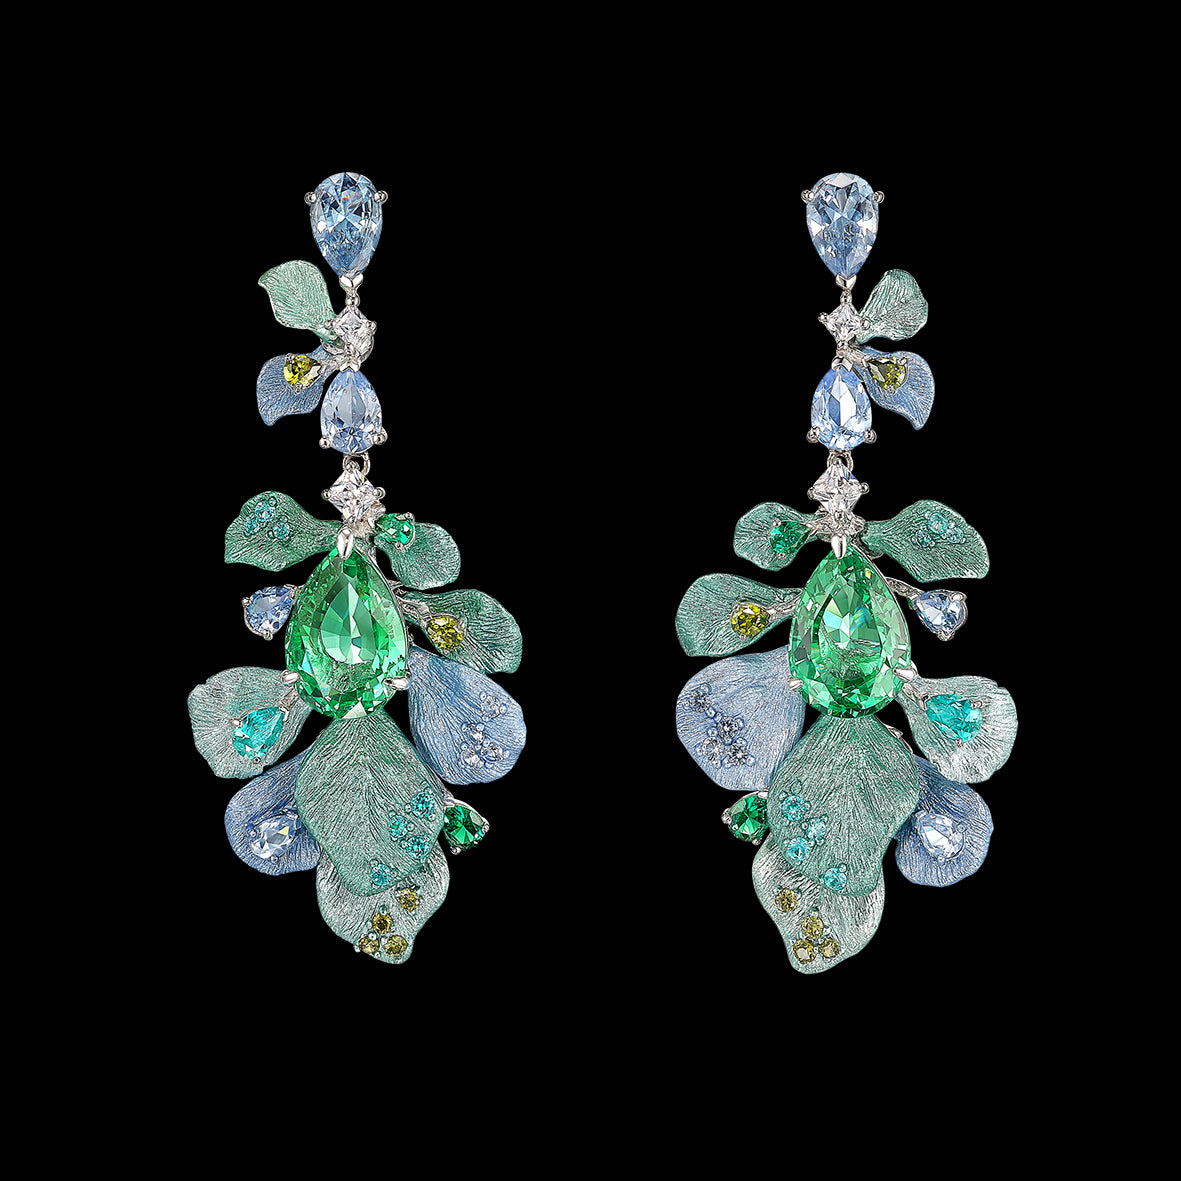 Paraiba Nereides Earrings, Earring, Anabela Chan Joaillerie - Fine jewelry with laboratory grown and created gemstones hand-crafted in the United Kingdom. Anabela Chan Joaillerie is the first fine jewellery brand in the world to champion laboratory-grown and created gemstones with high jewellery design, artisanal craftsmanship and a focus on ethical and sustainable innovations.